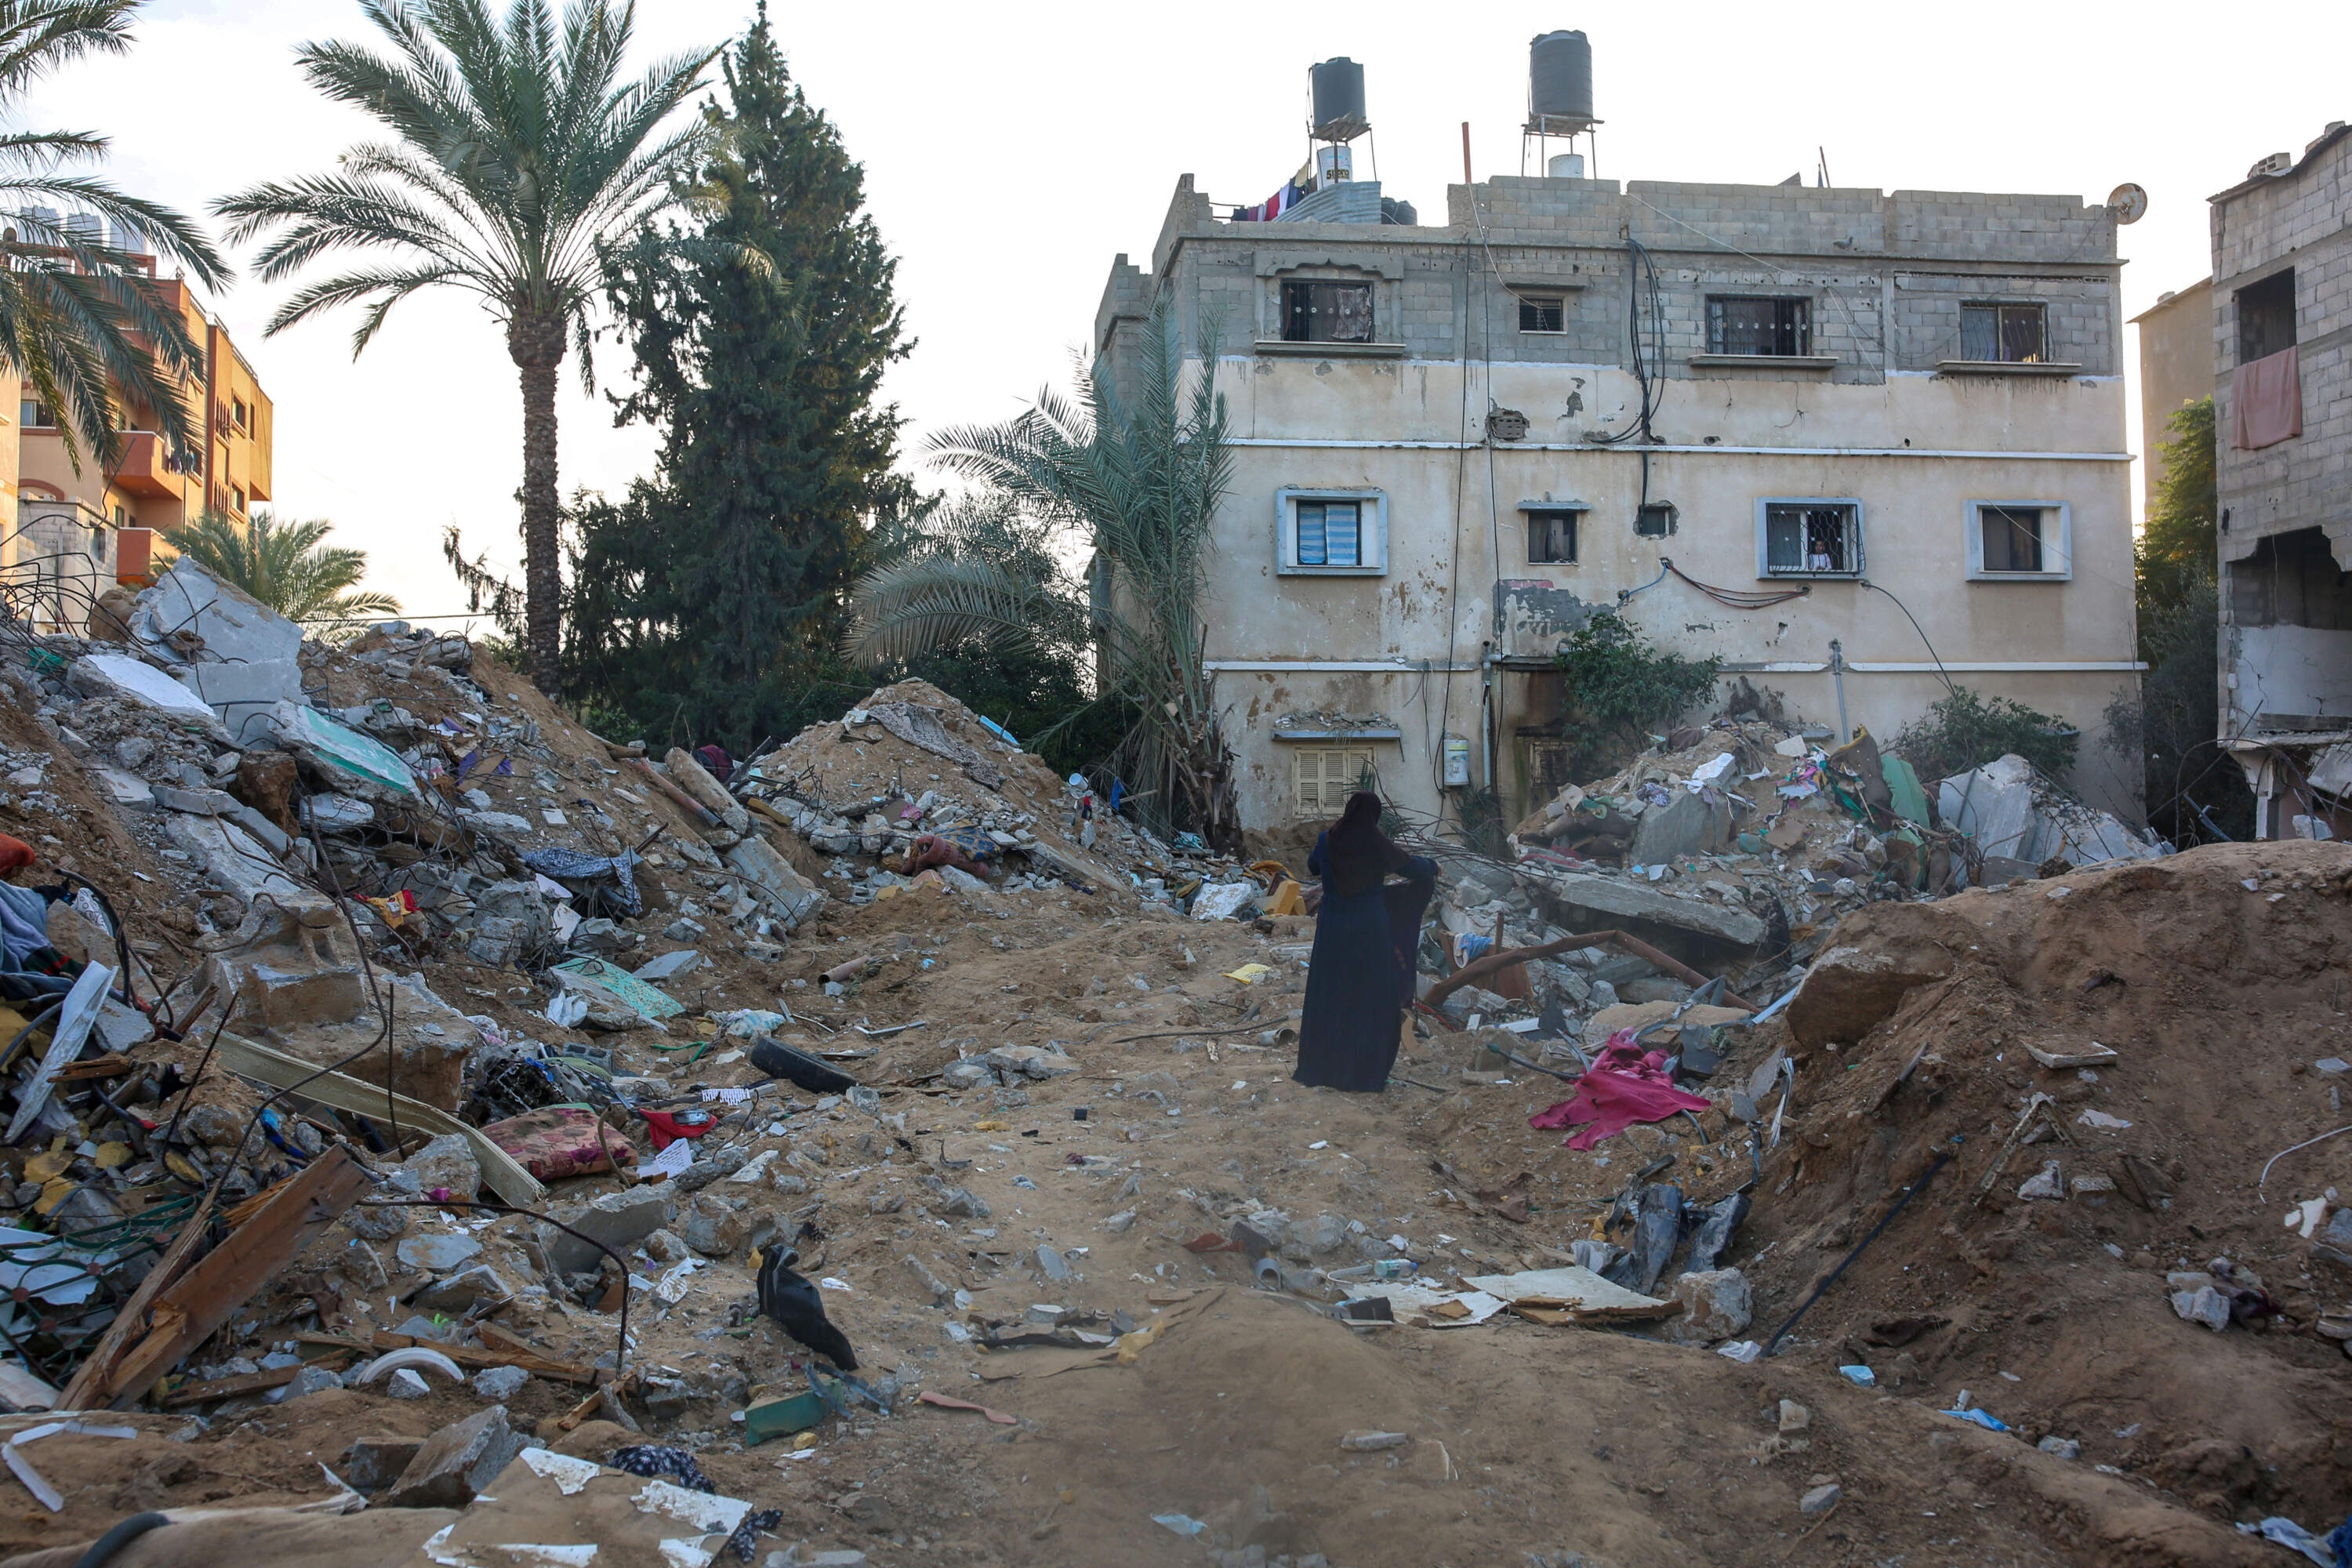 Melisya’s aunt, Yasmine, at the site of the girl’s destroyed family home. (Samar Abu Elouf/New York Times)